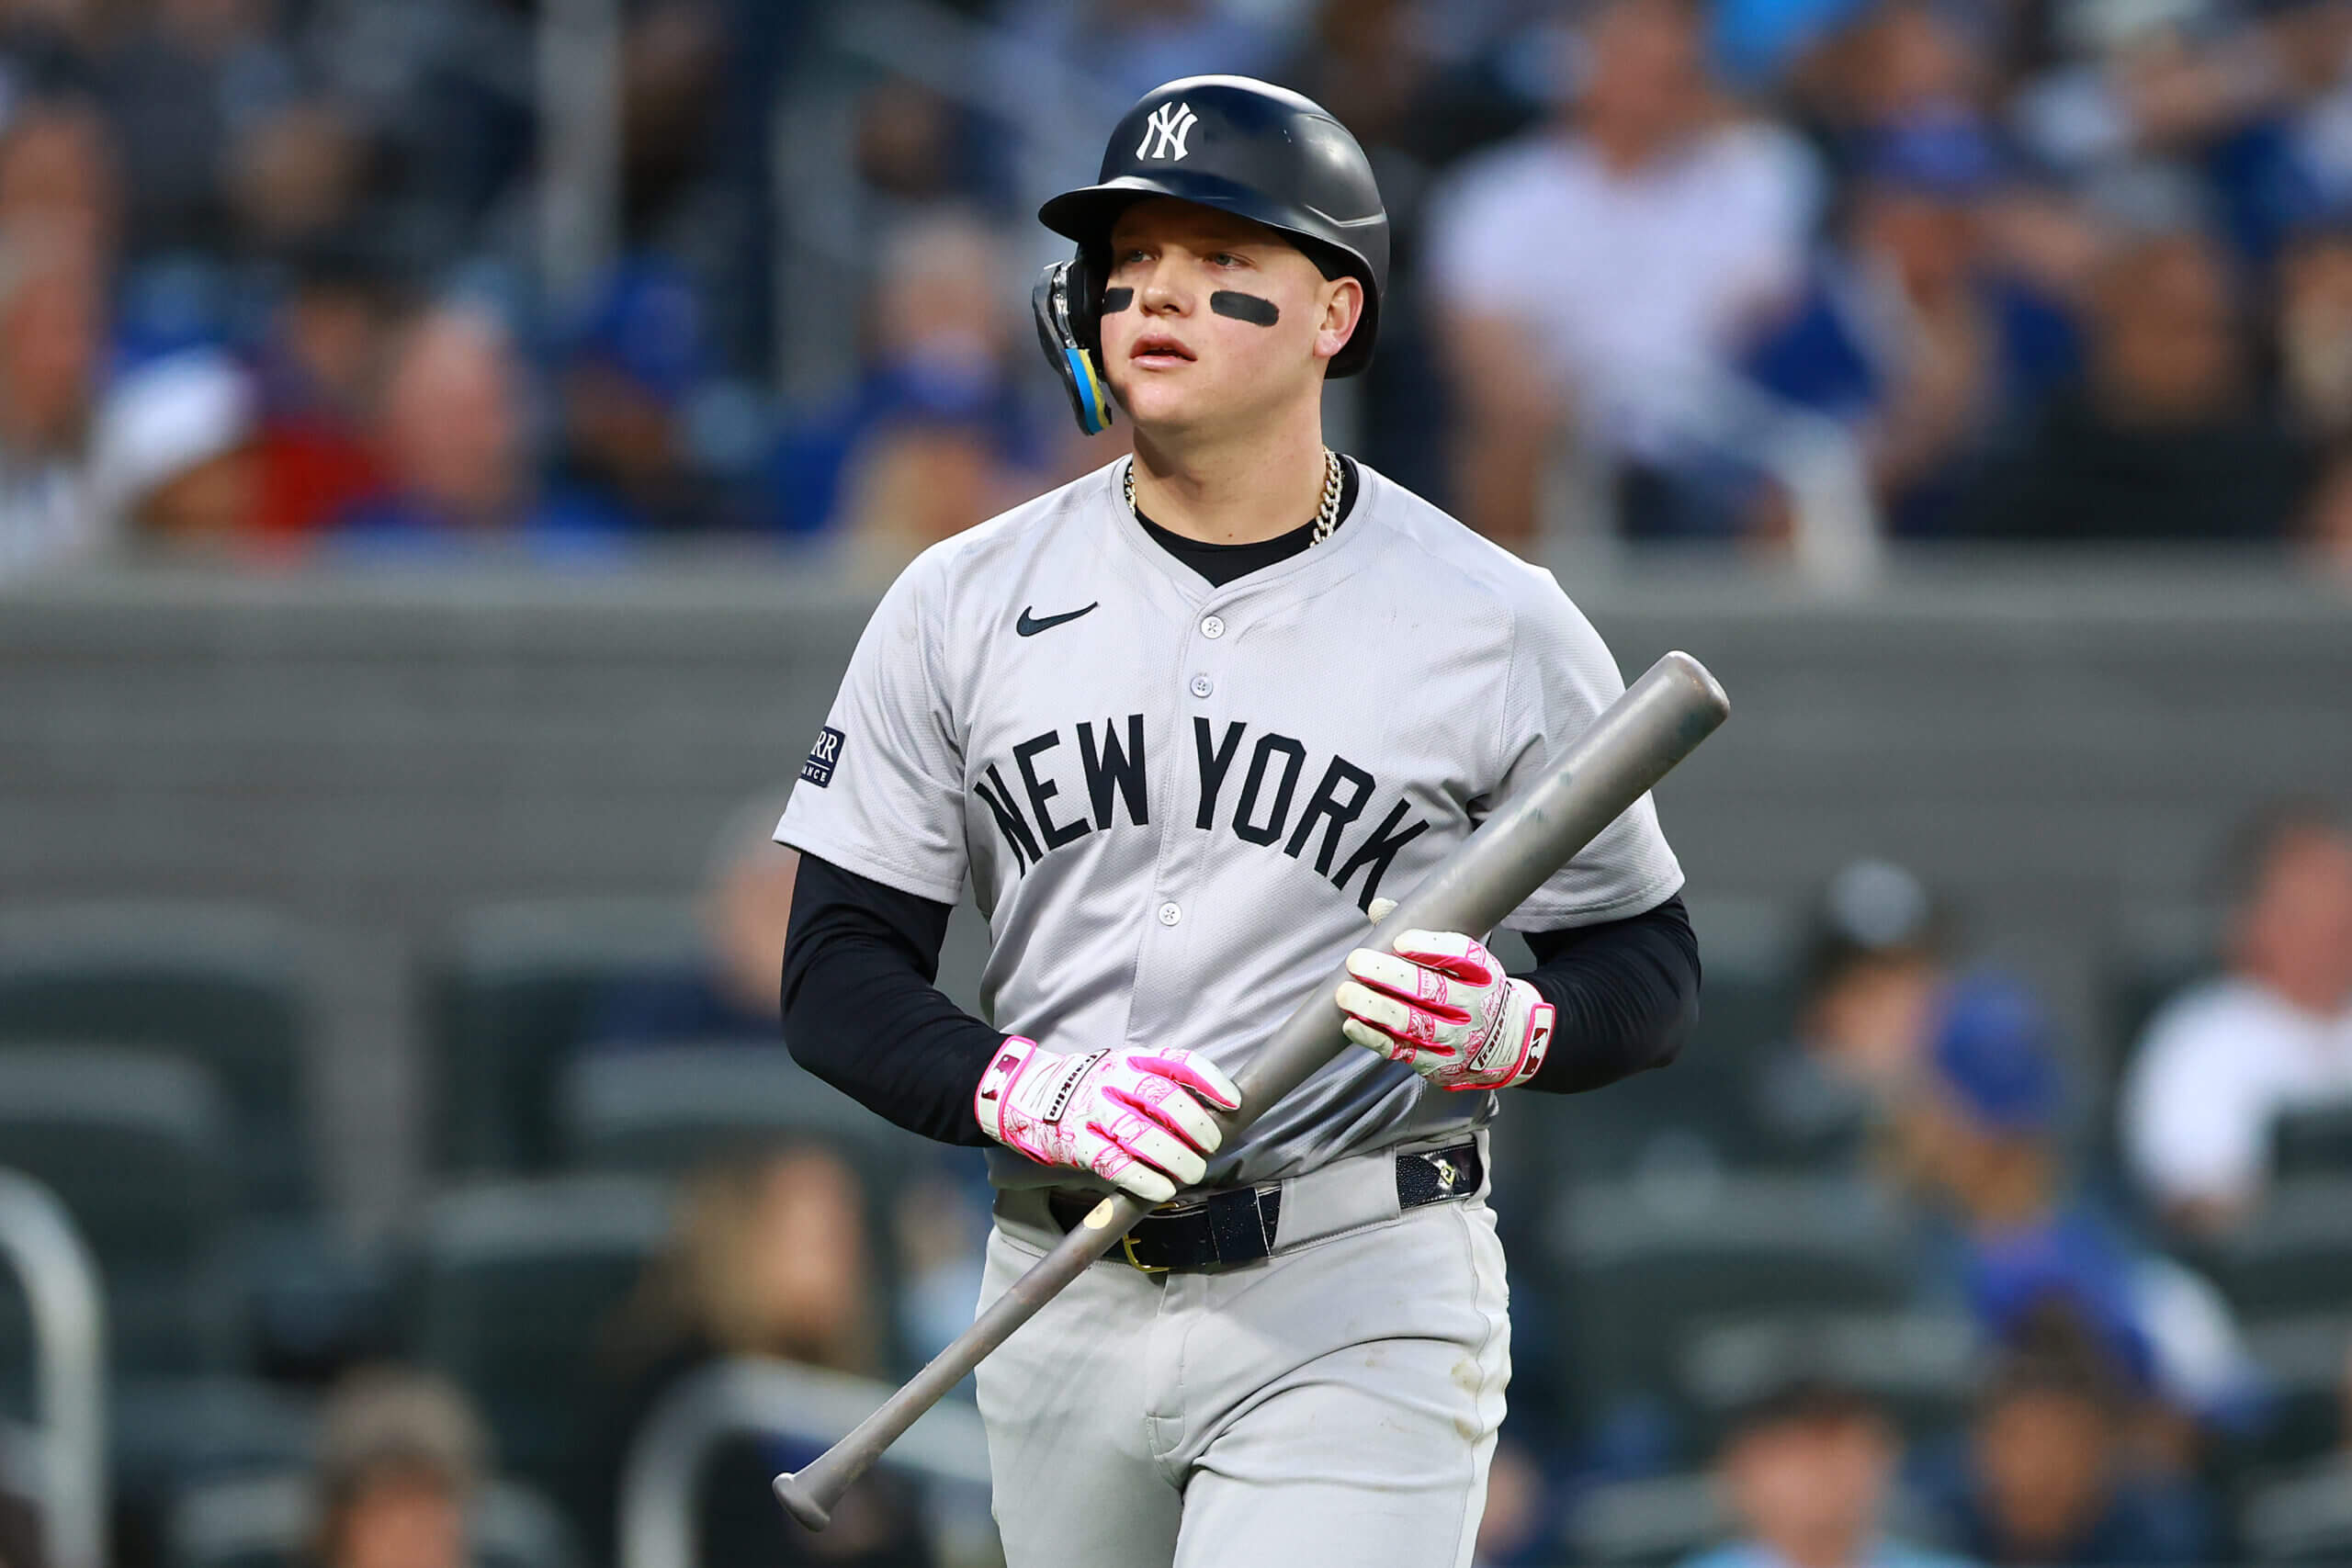 Yankees' Alex Verdugo looks to end long slump at the plate as second half begins